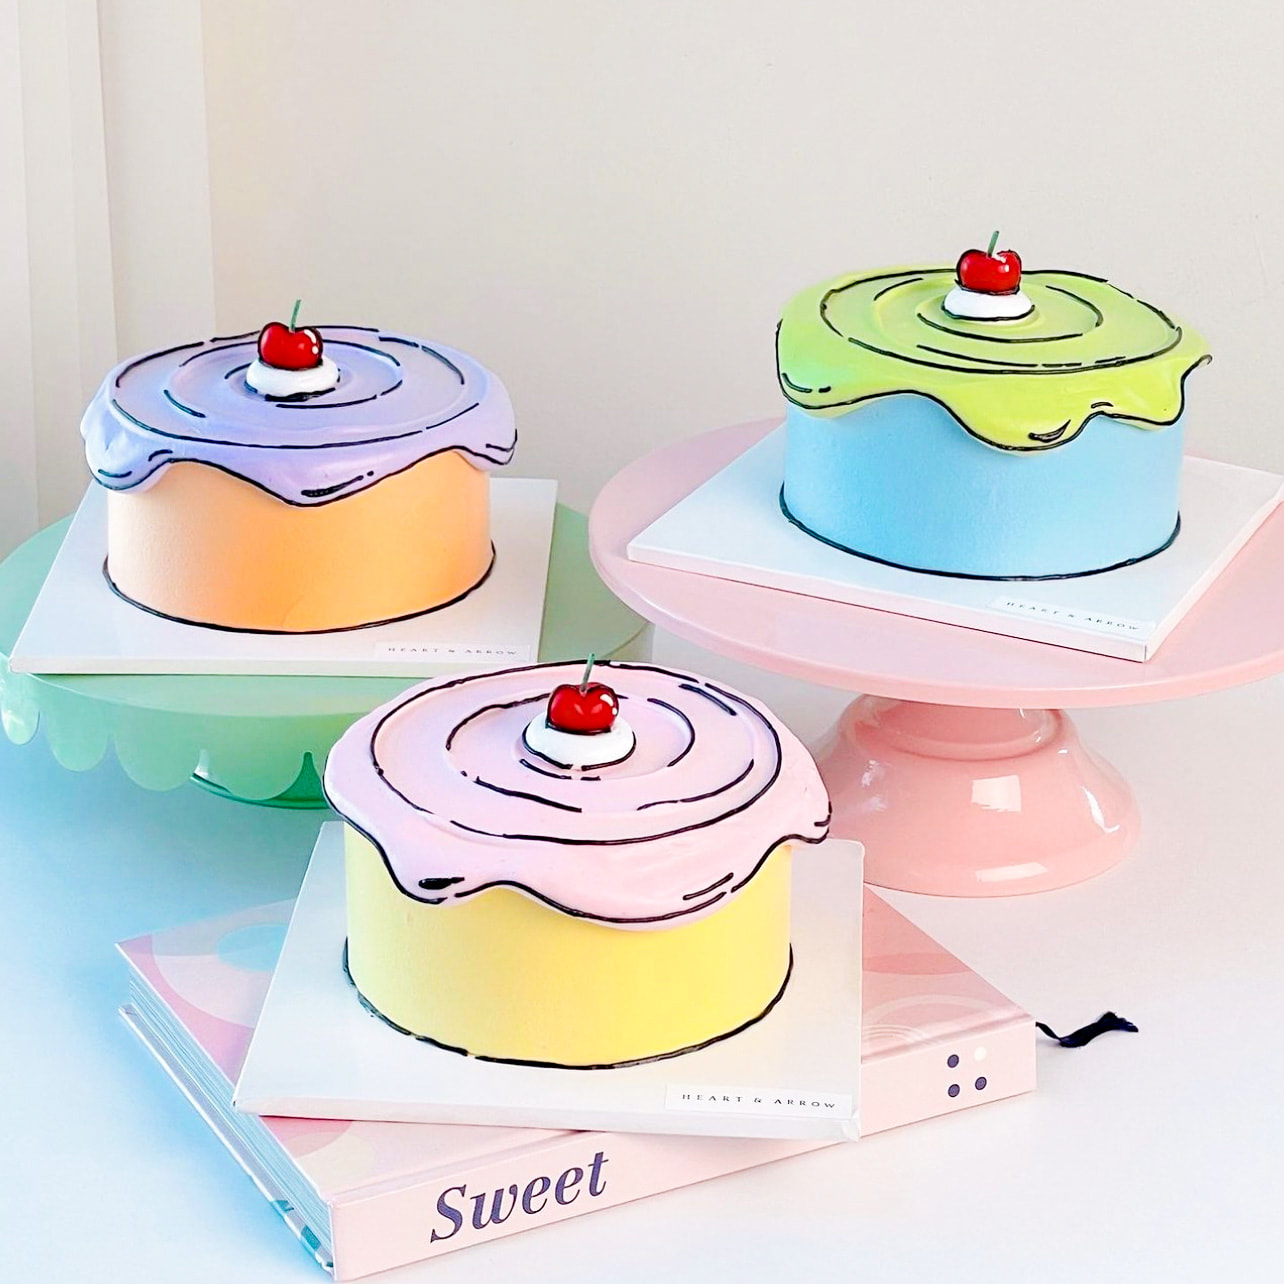 The Professional Cake Decorating Techniques You Must Know! | Craftsy |  www.craftsy.com